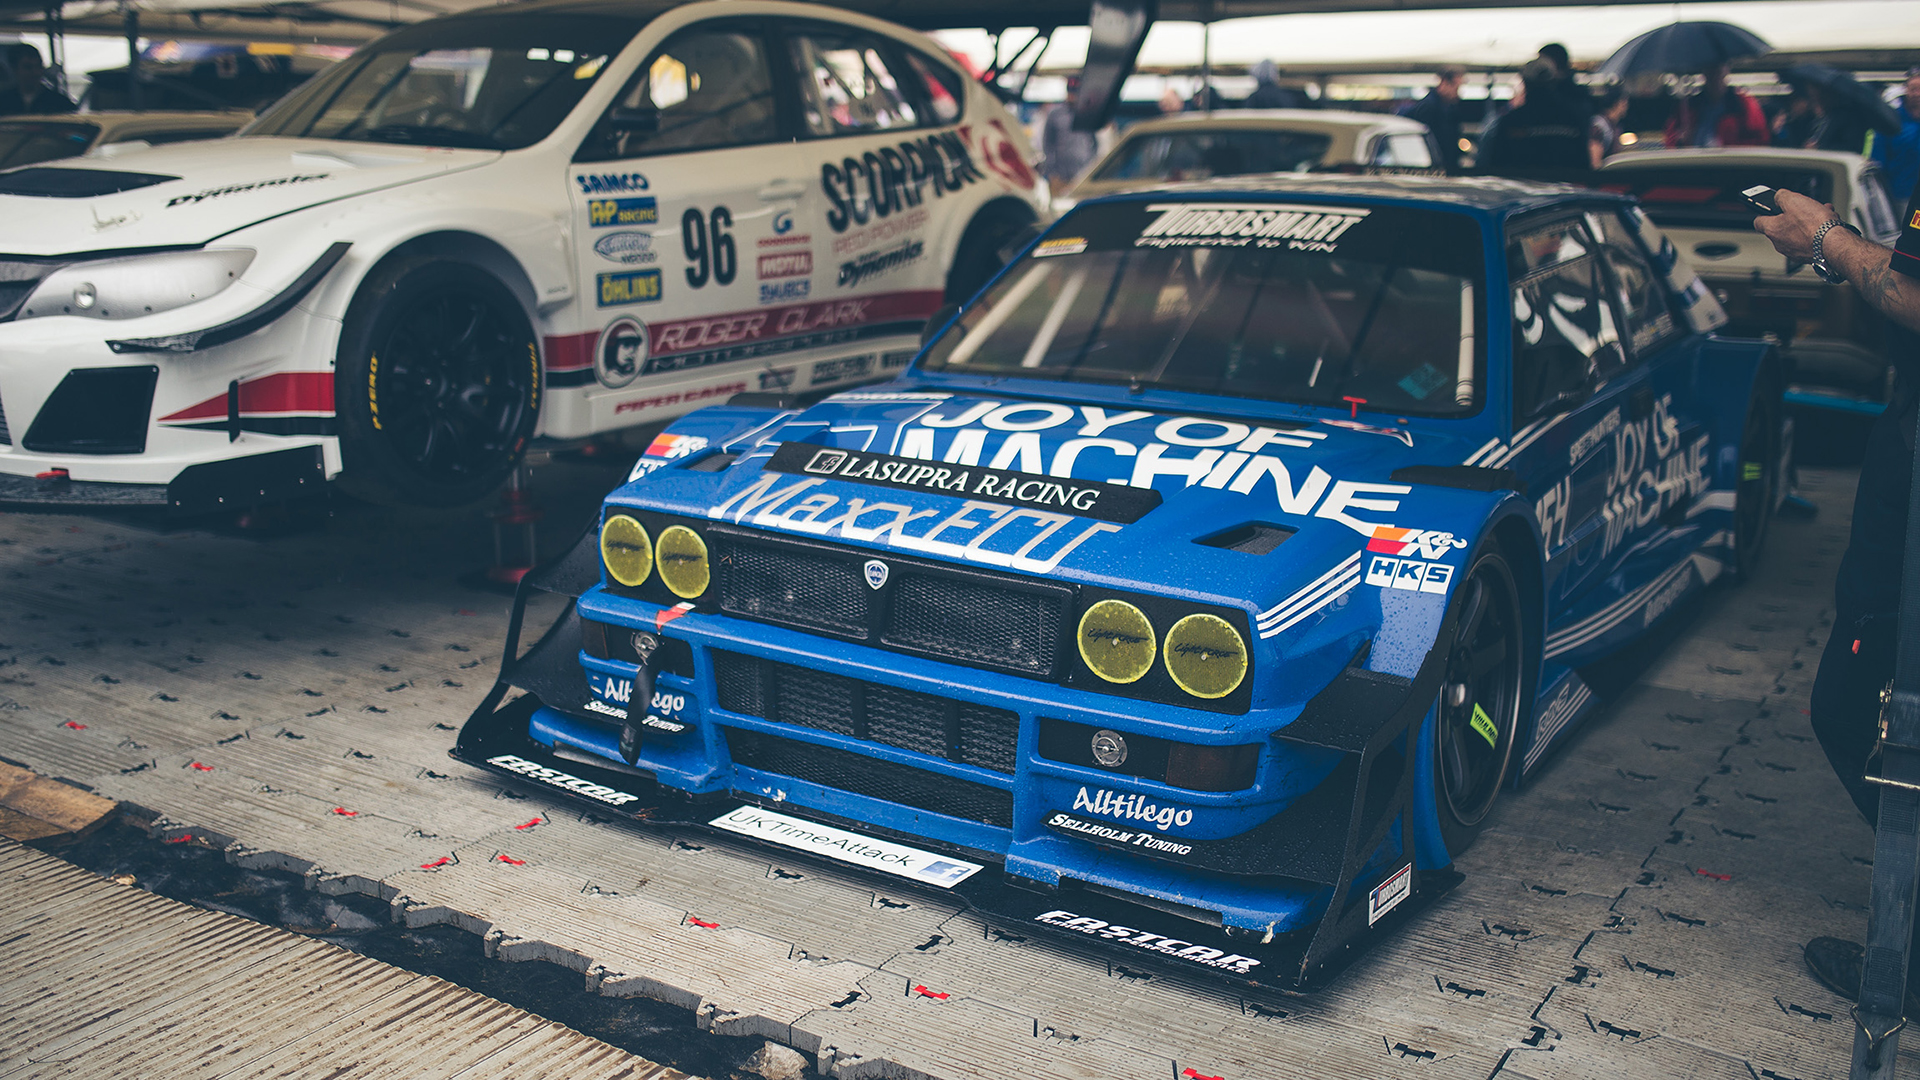 A Lancia touring car in the foreground (@fosgoodwood)